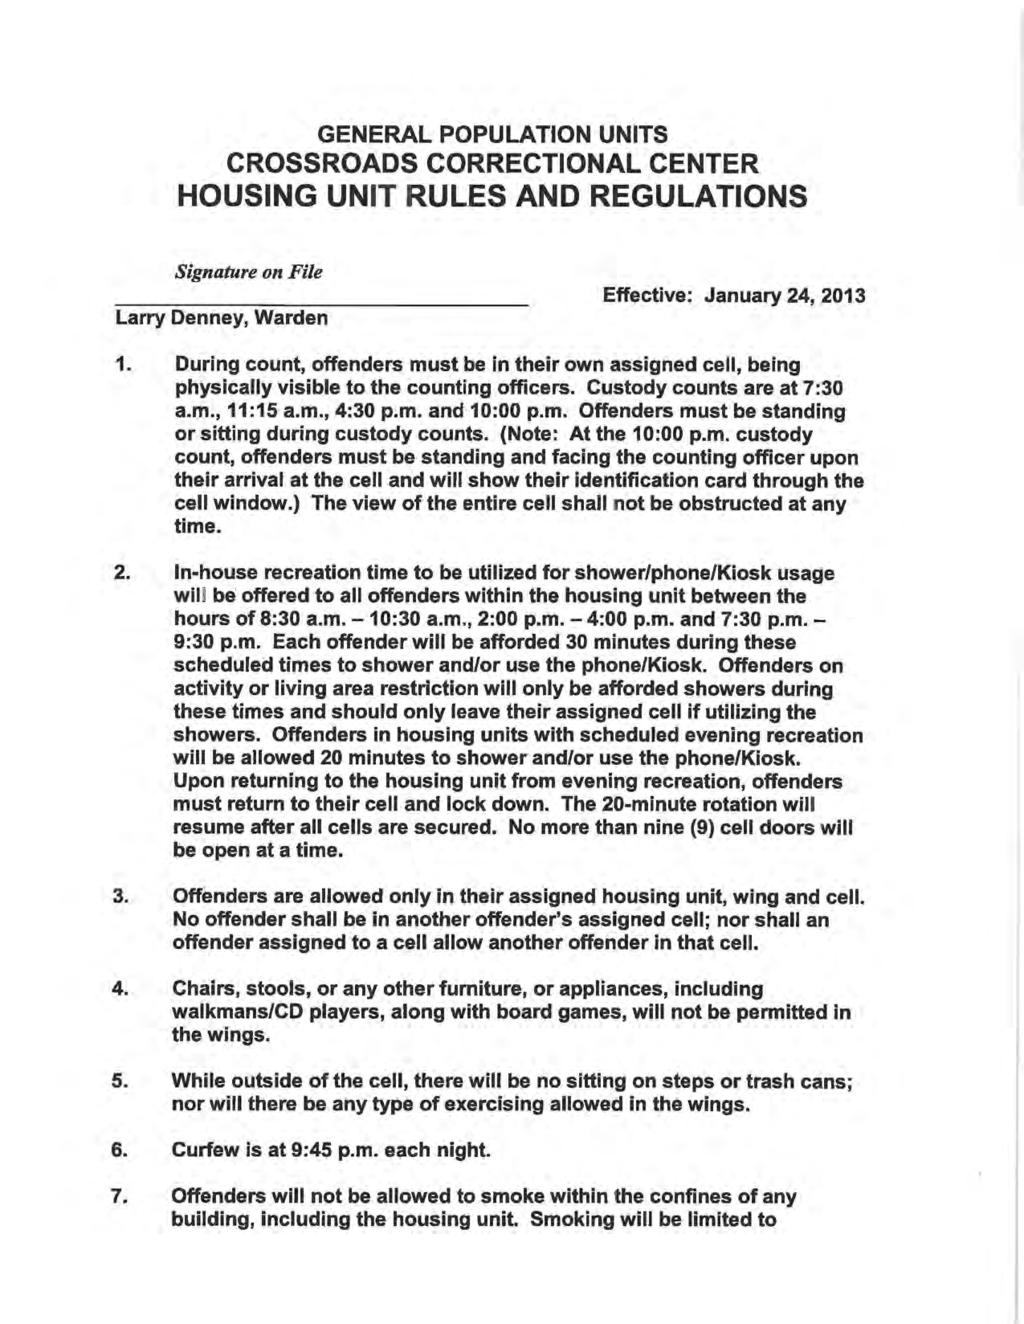 GENERAL POPULATION UNITS CROSSROADS CORRECTIONAL CENTER HOUSING UNIT RULES AND REGULATIONS Signature on File Larry Denney, Warden Effective: January 24, 2013 1.